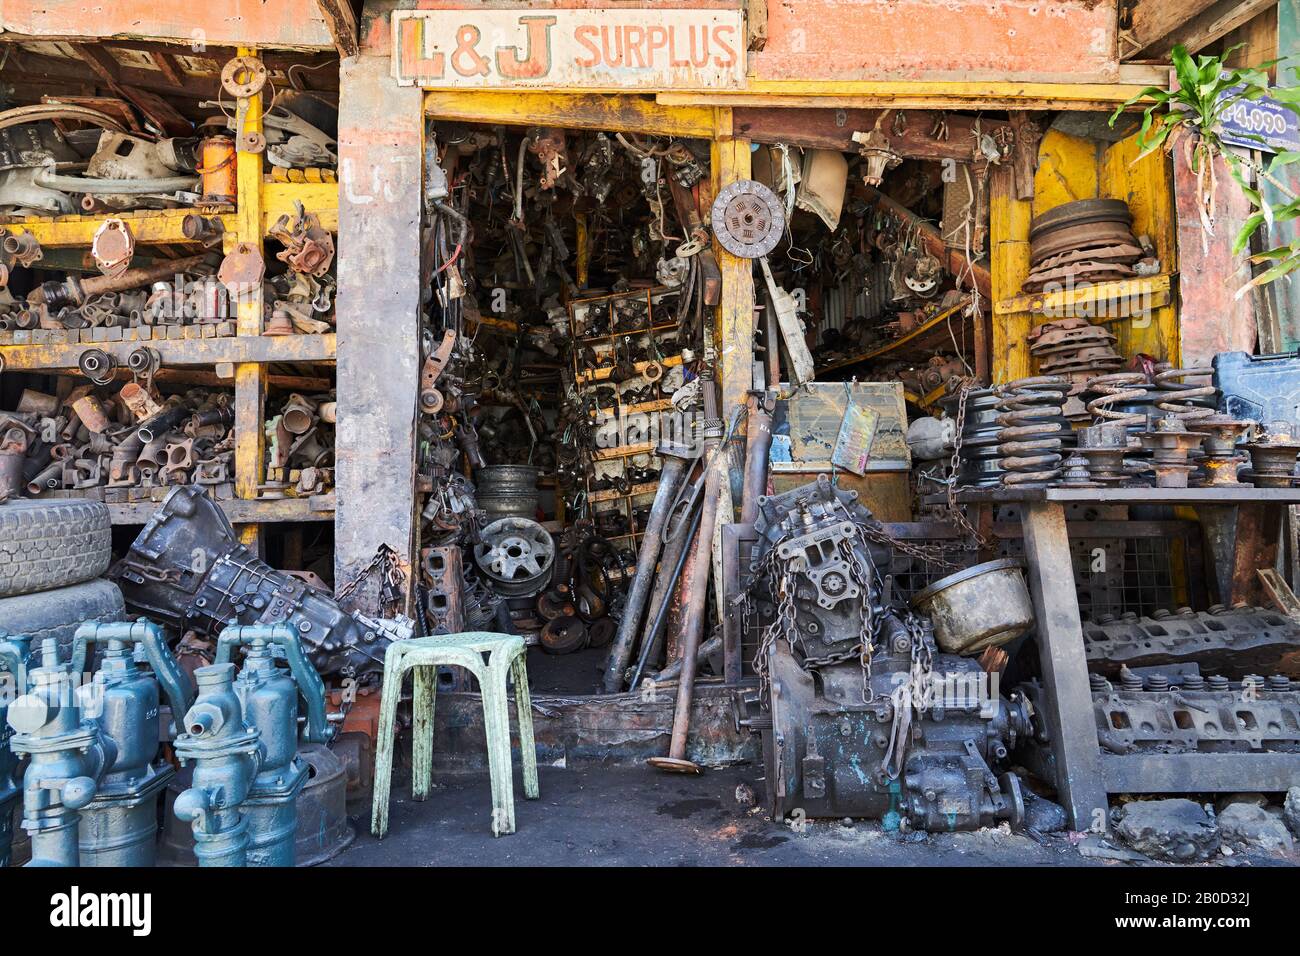 Iloilo City, Philippines: Close-up of an auto junk and repair shop with used rusty and oily engine parts, wheels, and water pumps Stock Photo